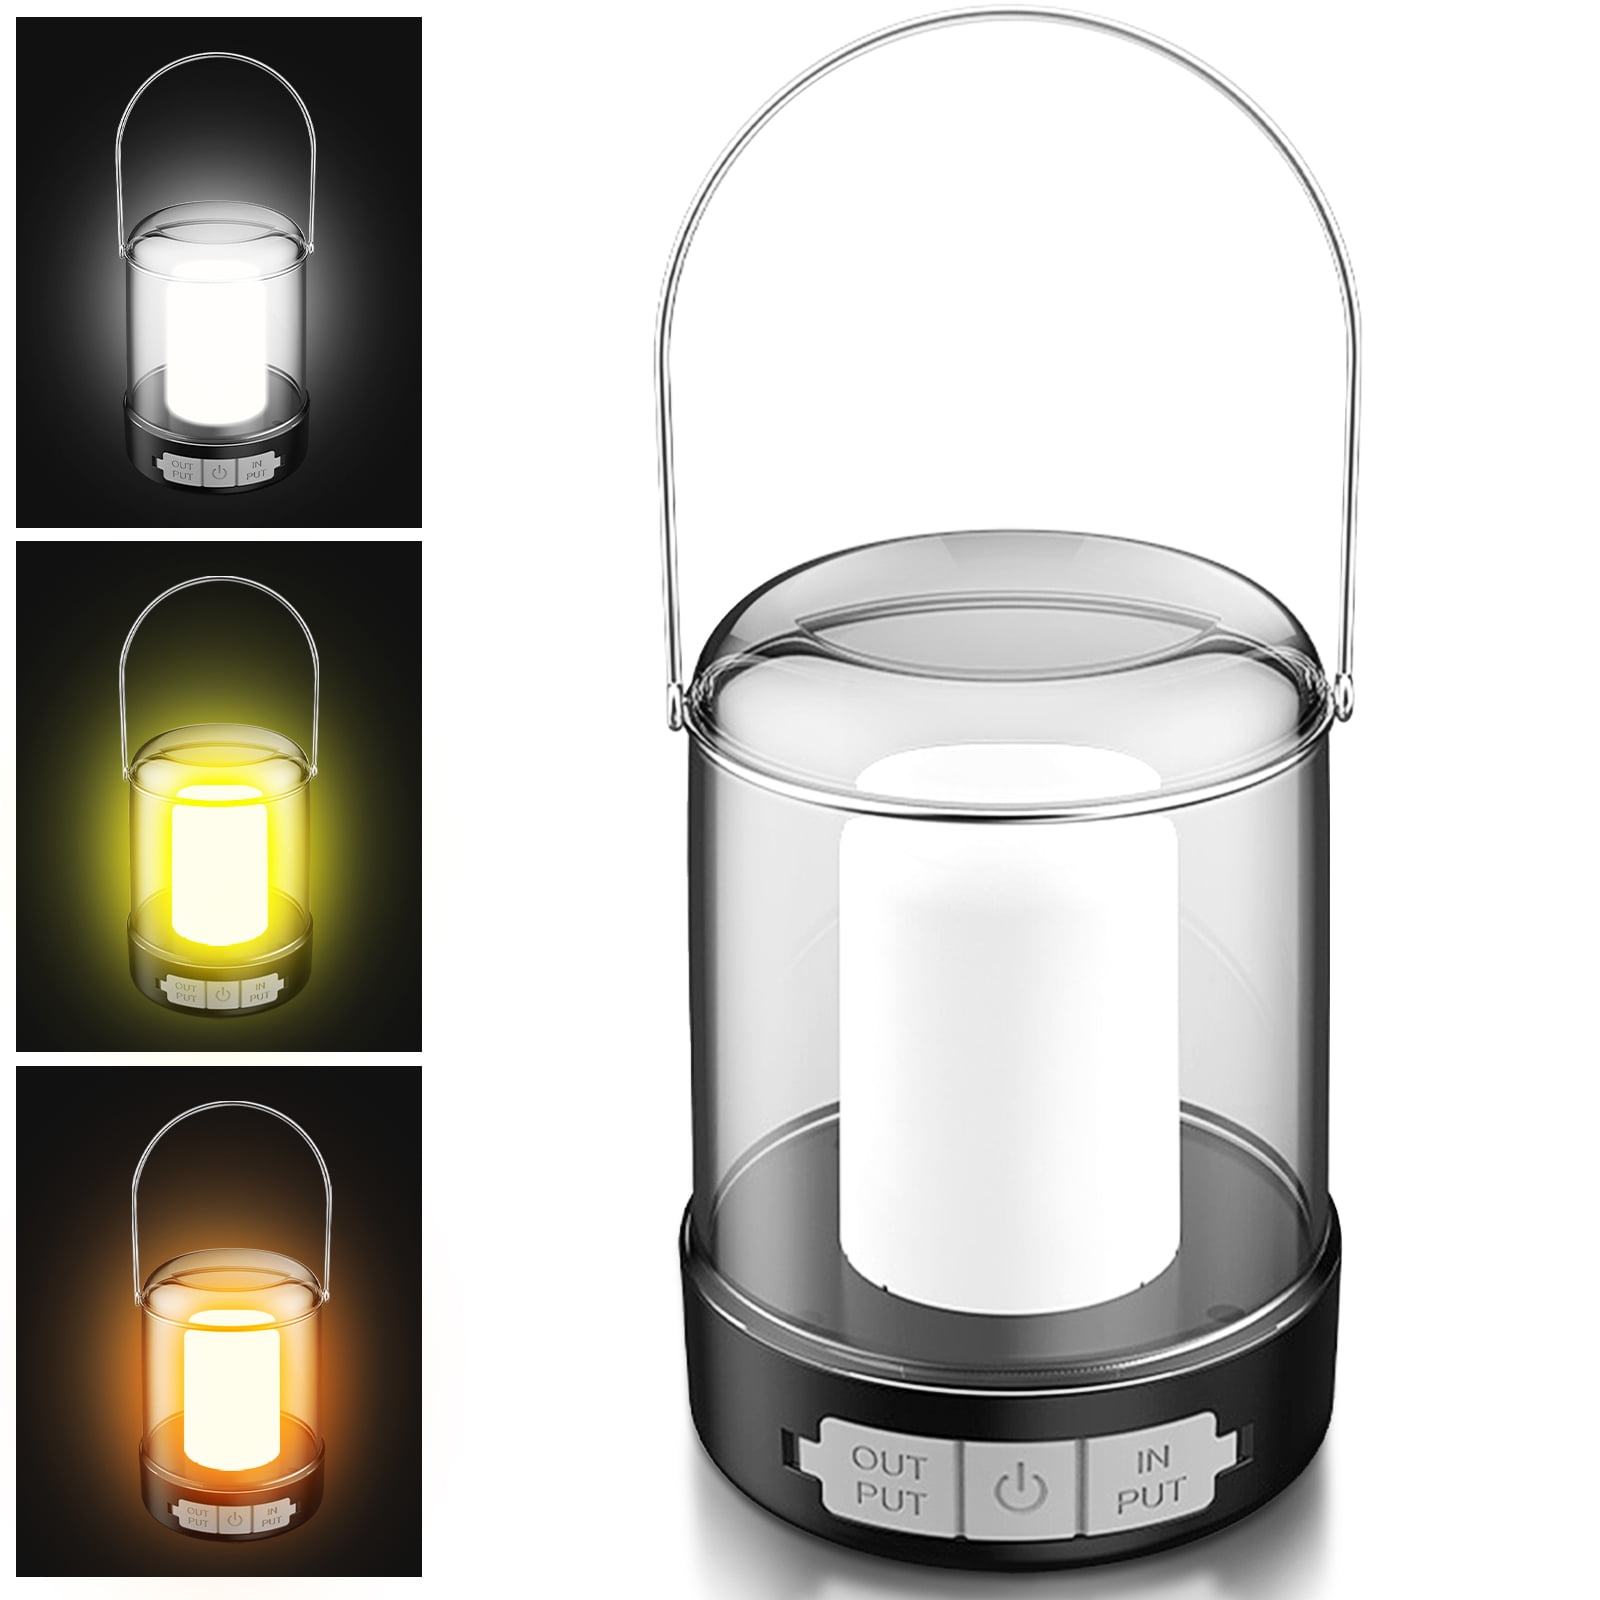 MalloMe Camping Lantern Multicolor 8 Pack Lanterns for Power